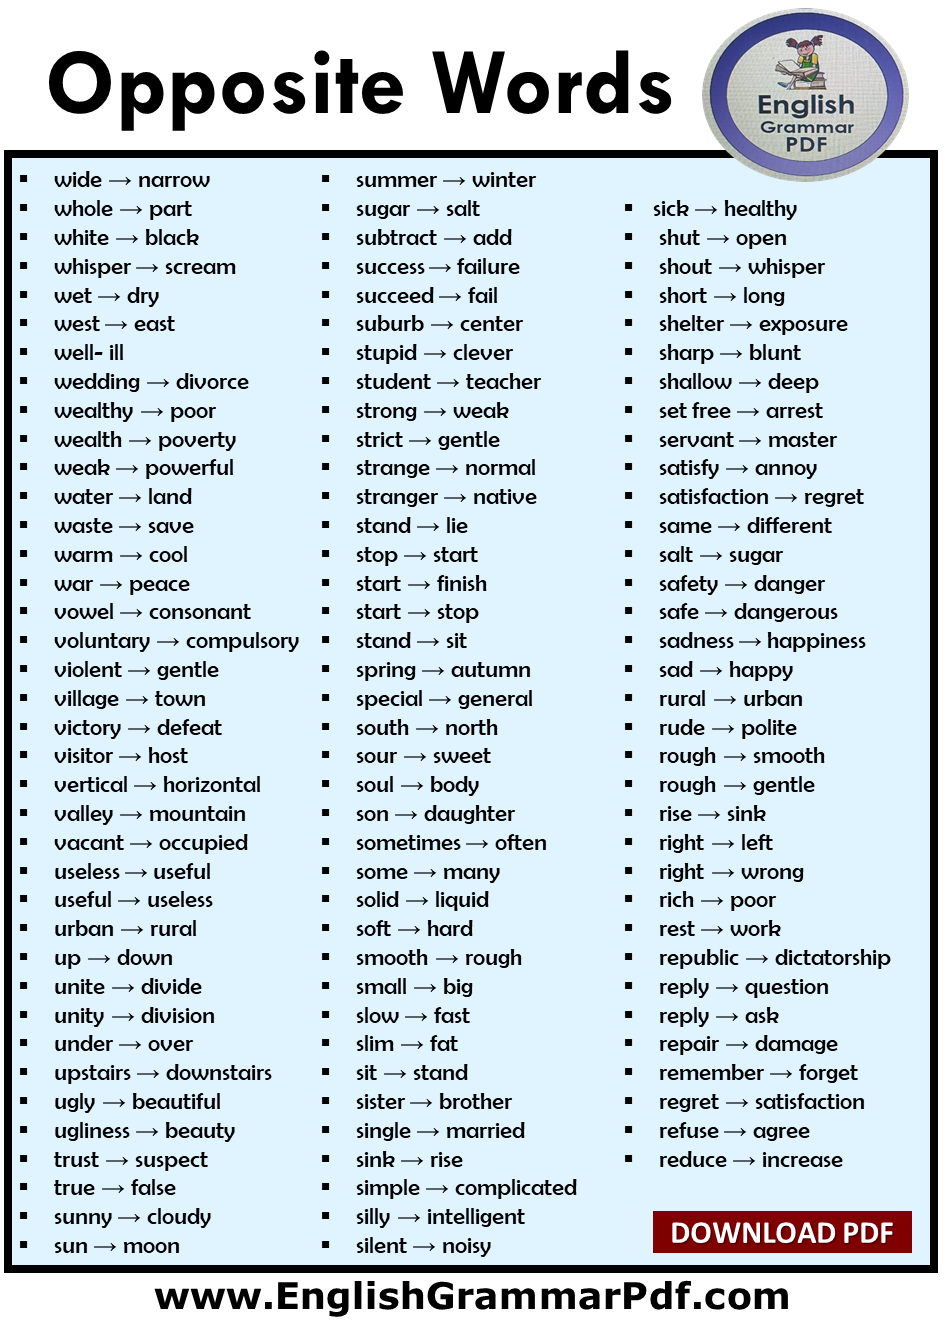 900 Opposite Words in English